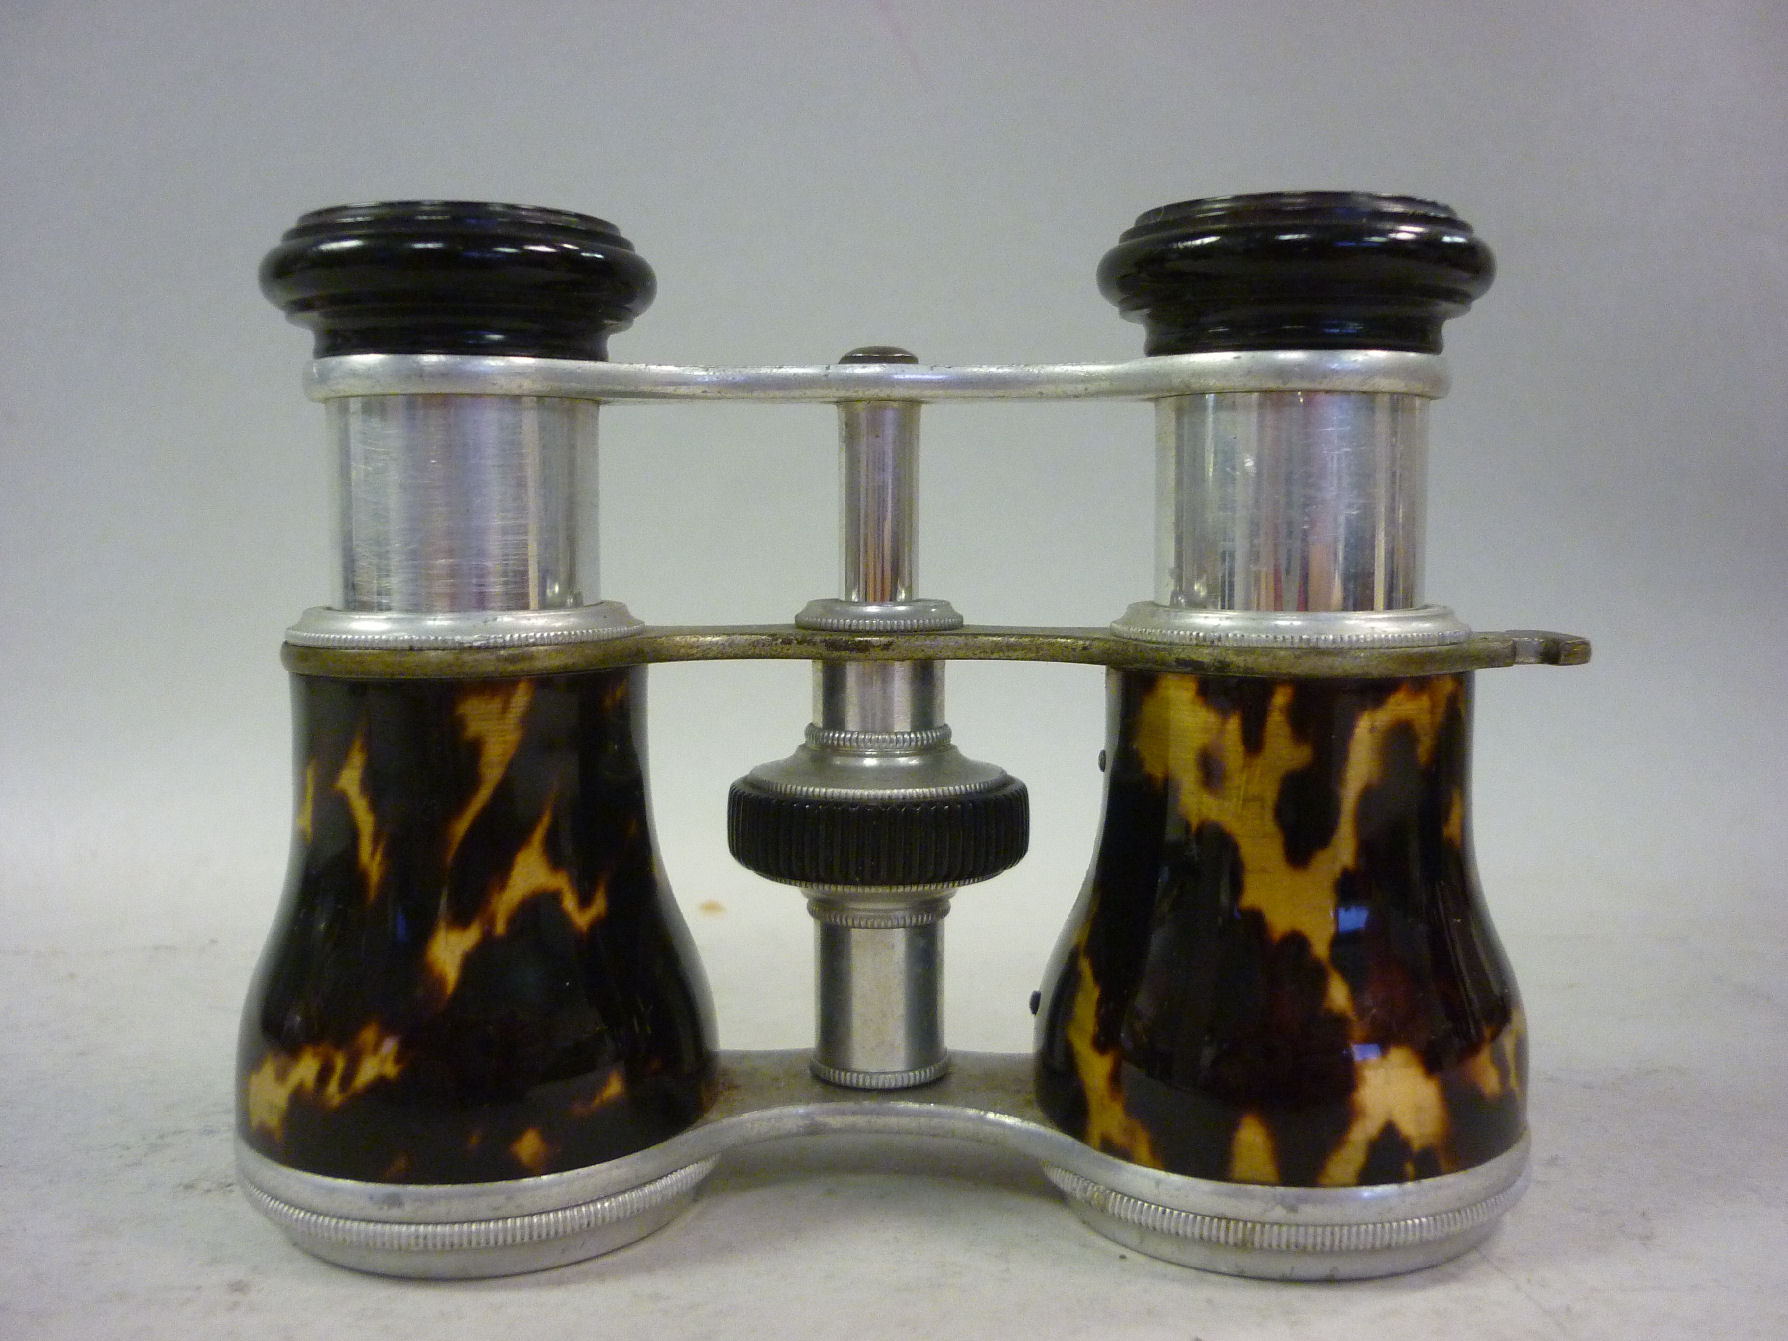 A pair of early 20thC alloy framed opera glasses, the barrels clad in simulated tortoiseshell